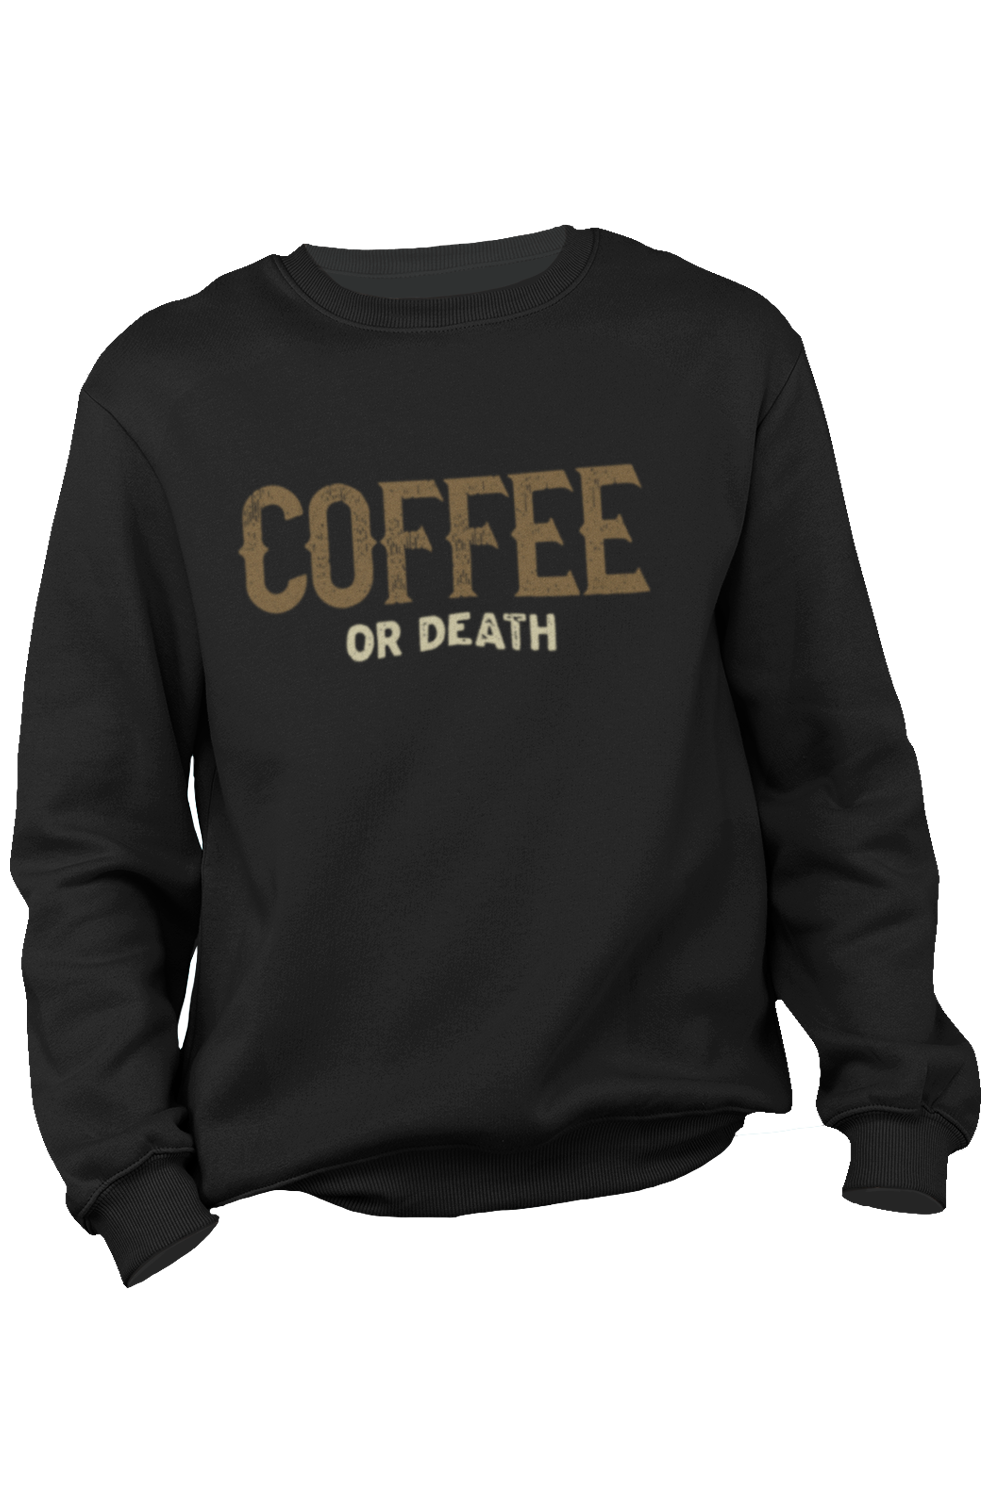 A sturdy and warm Coffee or Death Motorcycle Sweatshirt by Mummyduck Customs sweatshirt bound to keep you warm in the colder months. Proper fuel like coffee keeps you running and warm also. Double protection. Design from HEL. A pre-shrunk, classic fit sweater that's made with air-jet spun yarn for a soft feel and reduc…